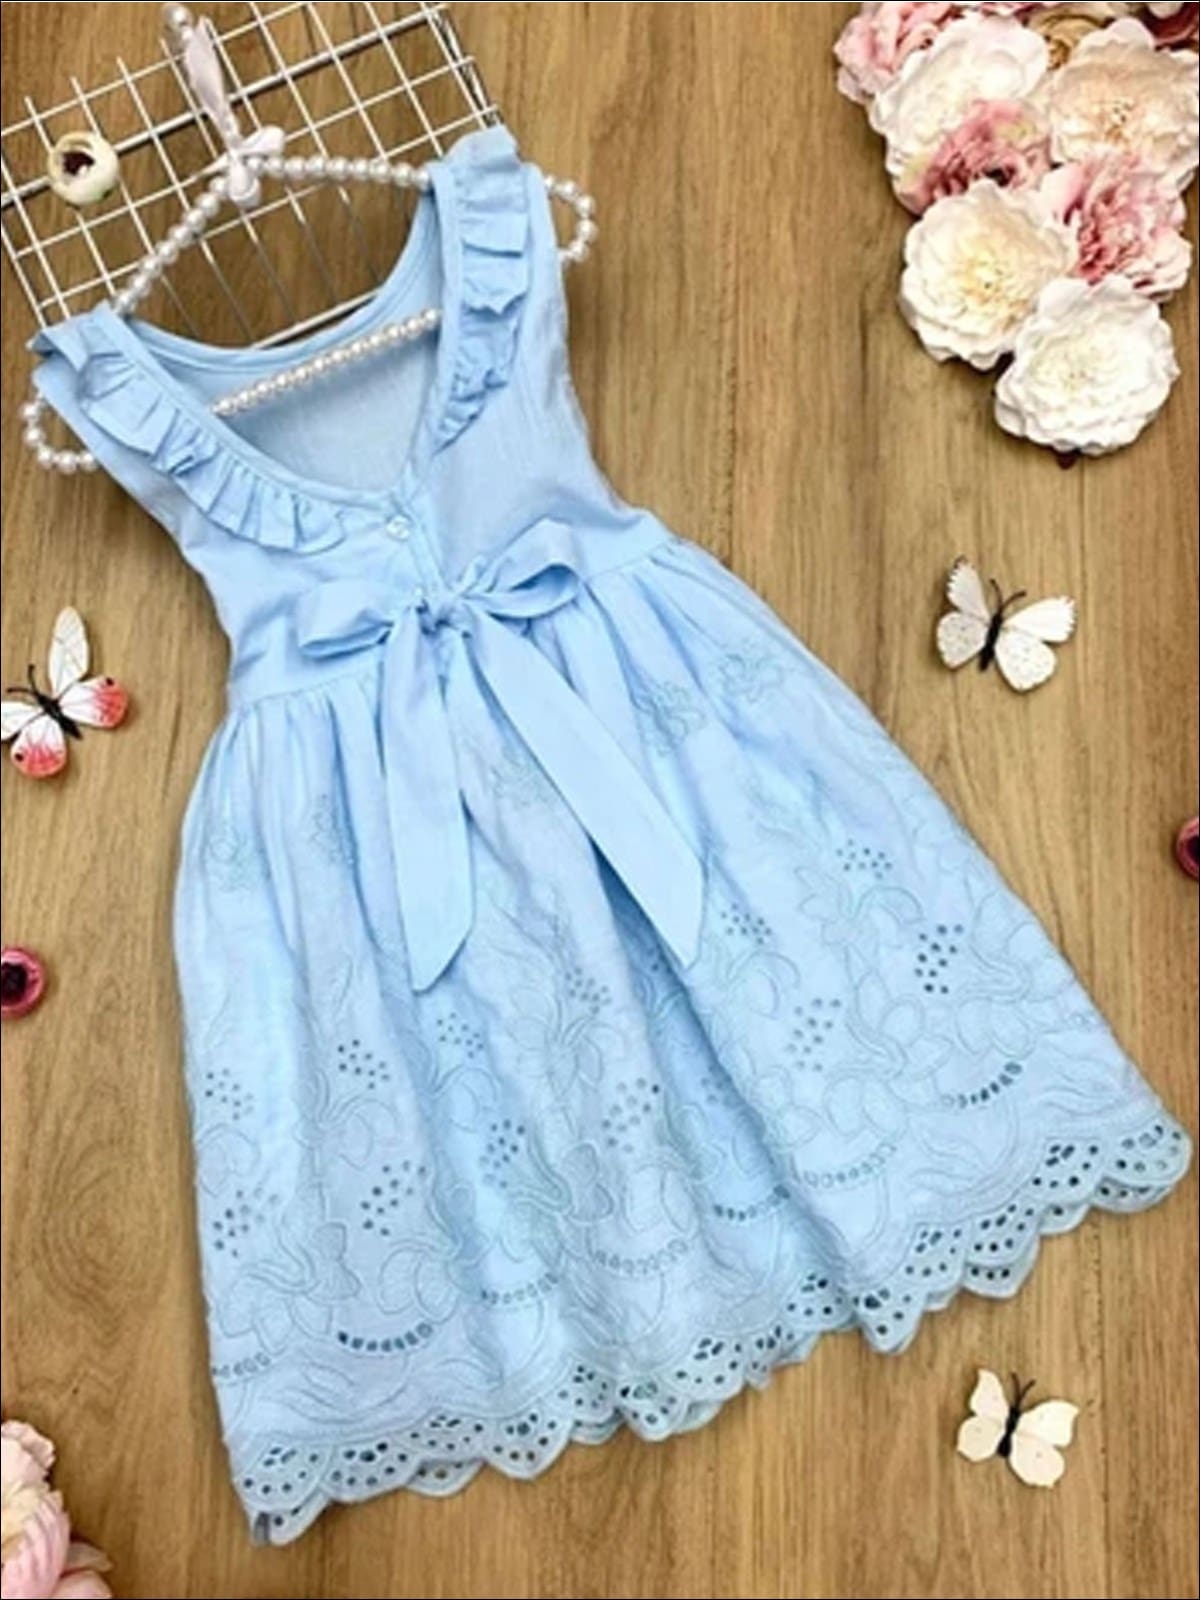 Little Girls Summer Sleeveless summer dress ruffle bib, scoop back design, embroidered lace skirt with detailed hem, and bow tie at the back - Mia Belle Girls